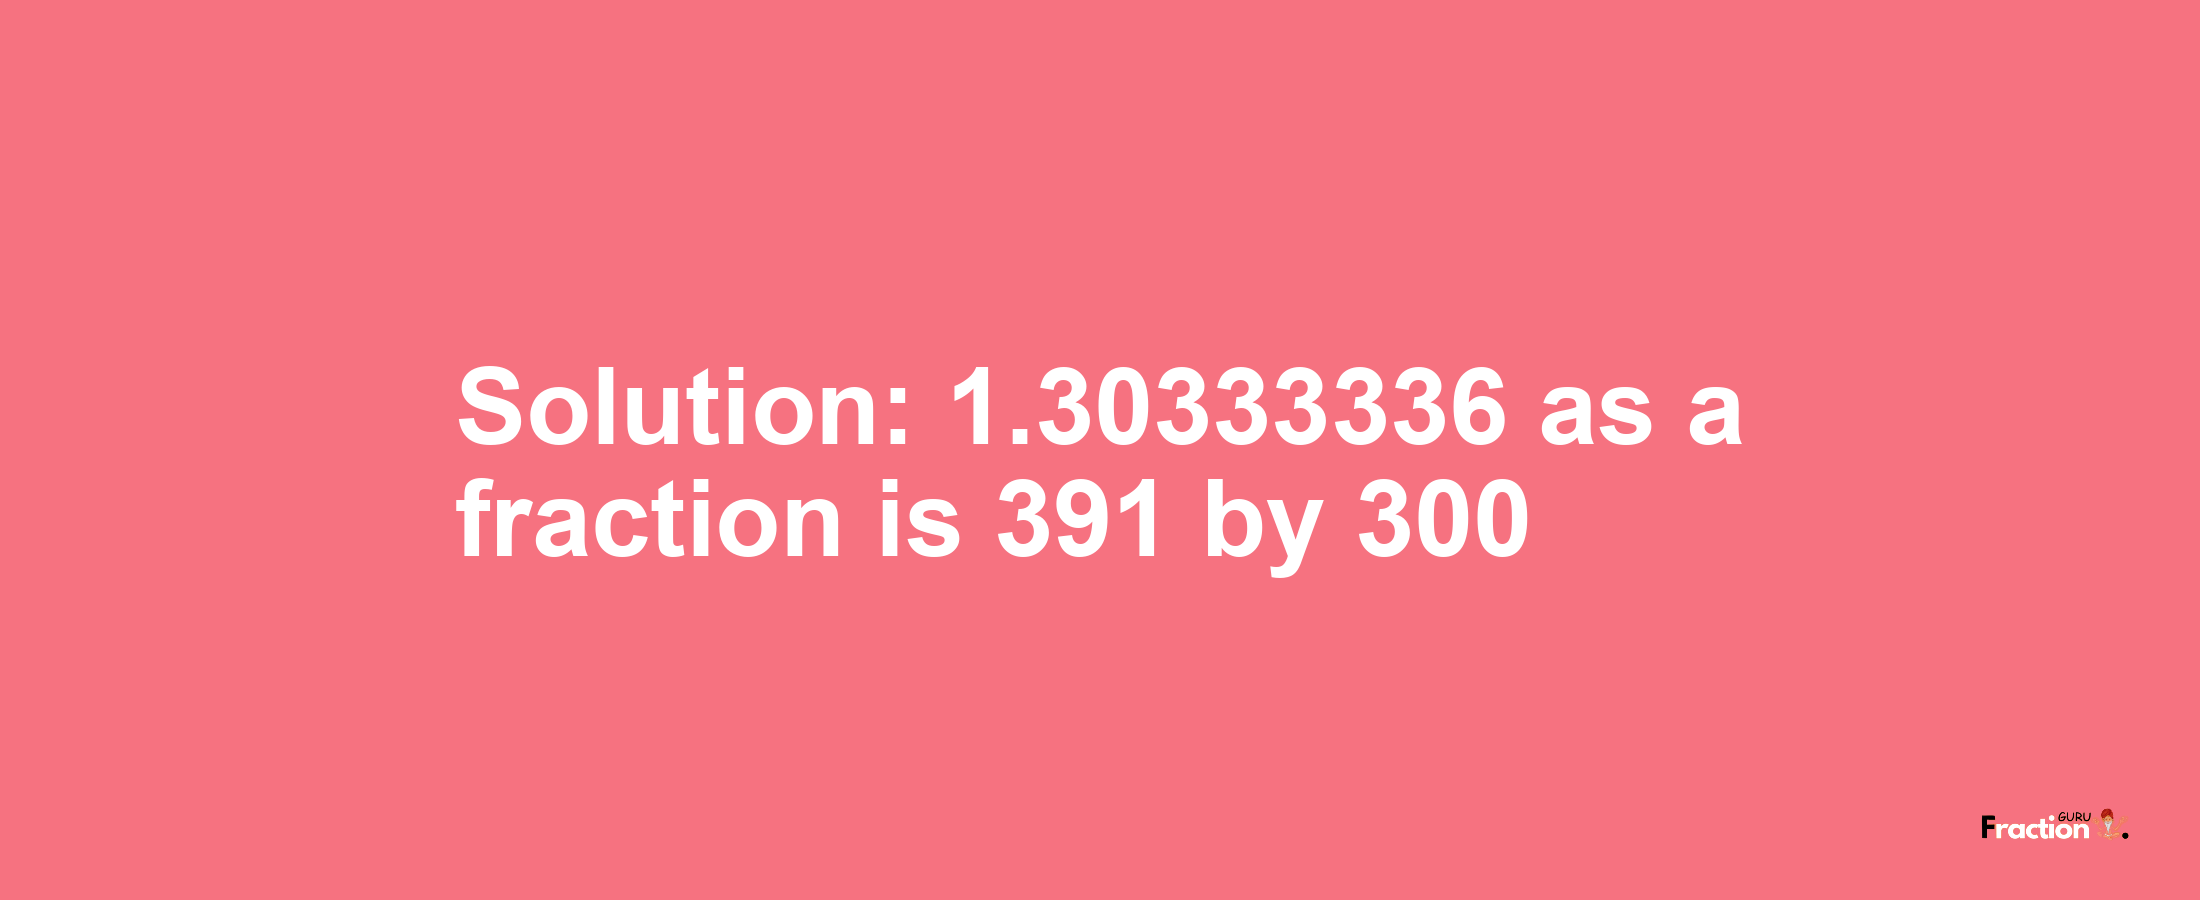 Solution:1.30333336 as a fraction is 391/300